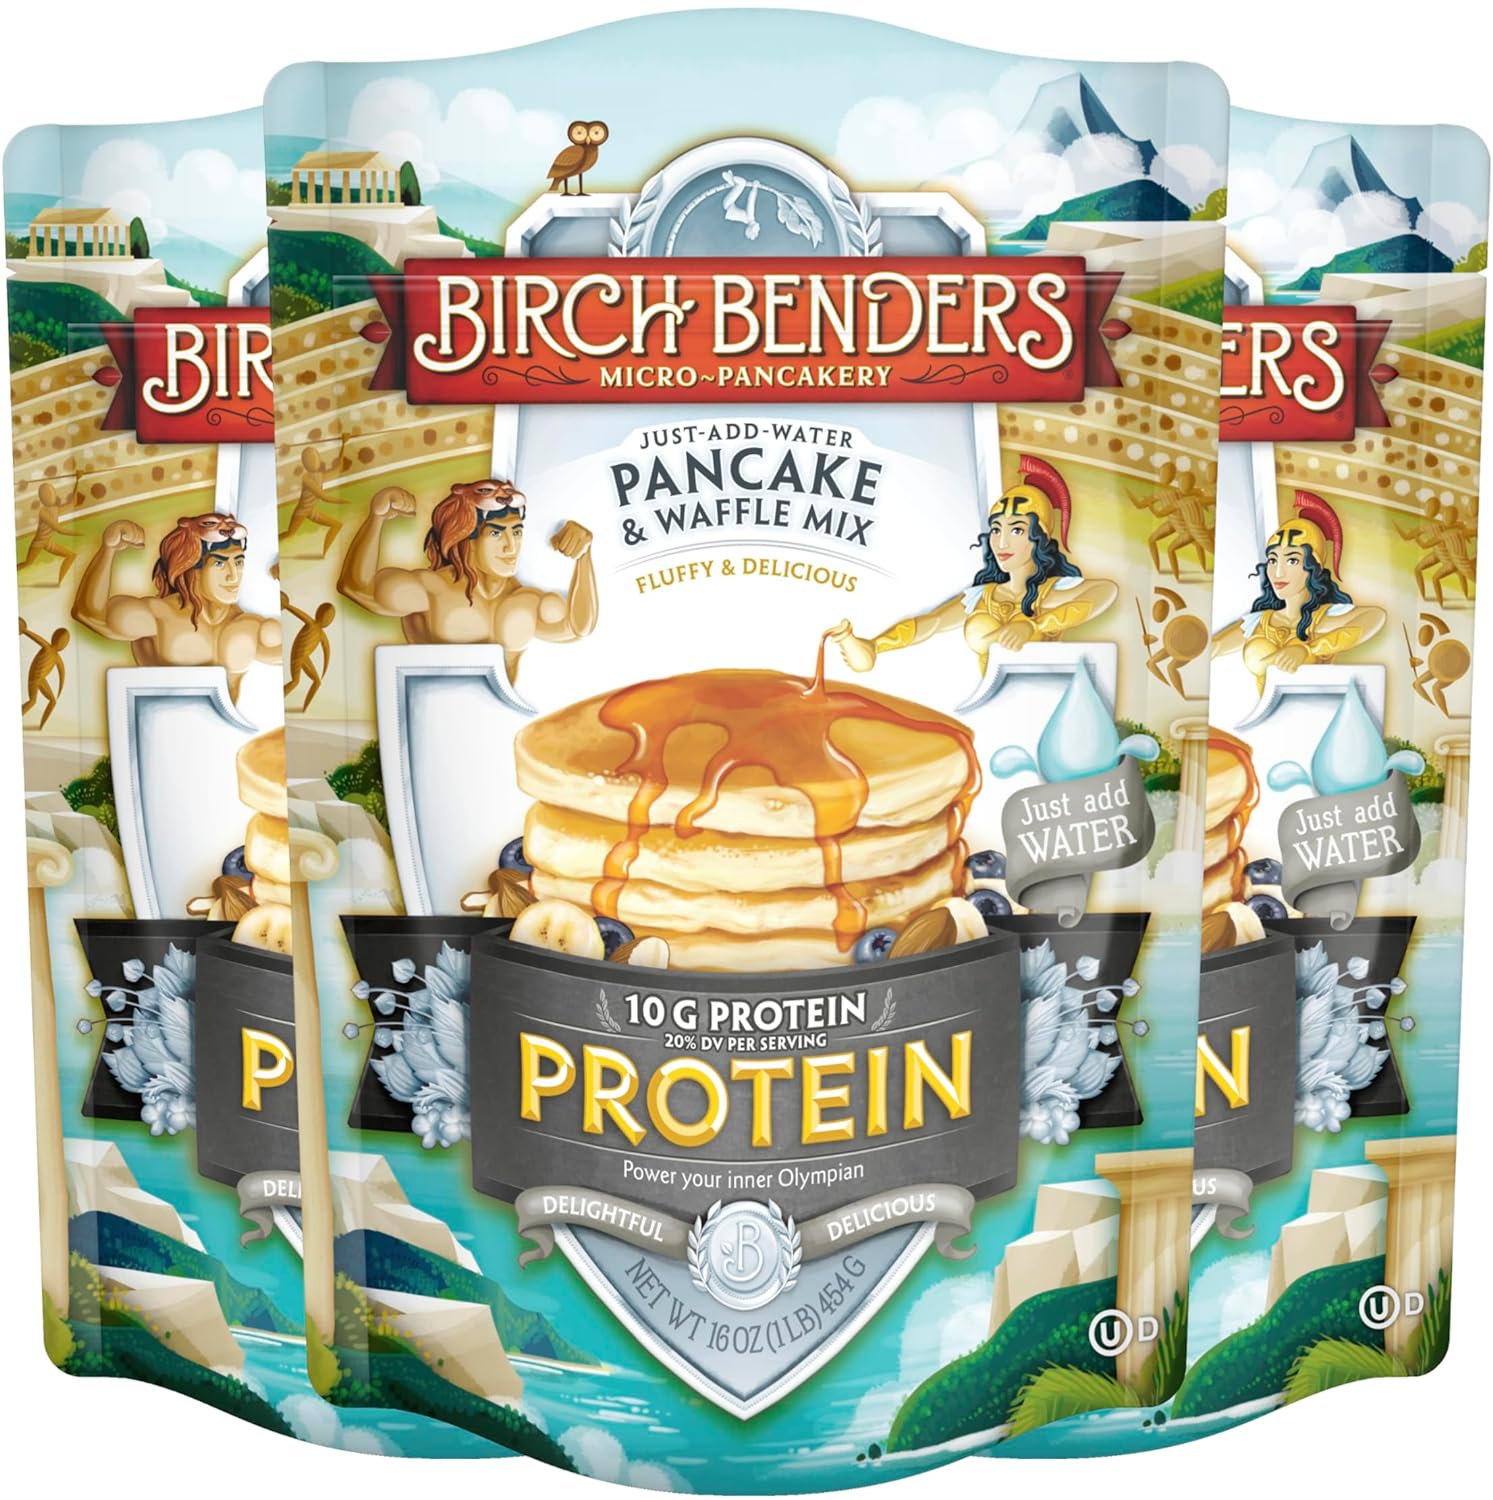 Performance Protein Pancake and Waffle Mix with Whey Protein by Birch Benders, 10 Grams Protein Per Serving, 1 Pound (Pack of 3)